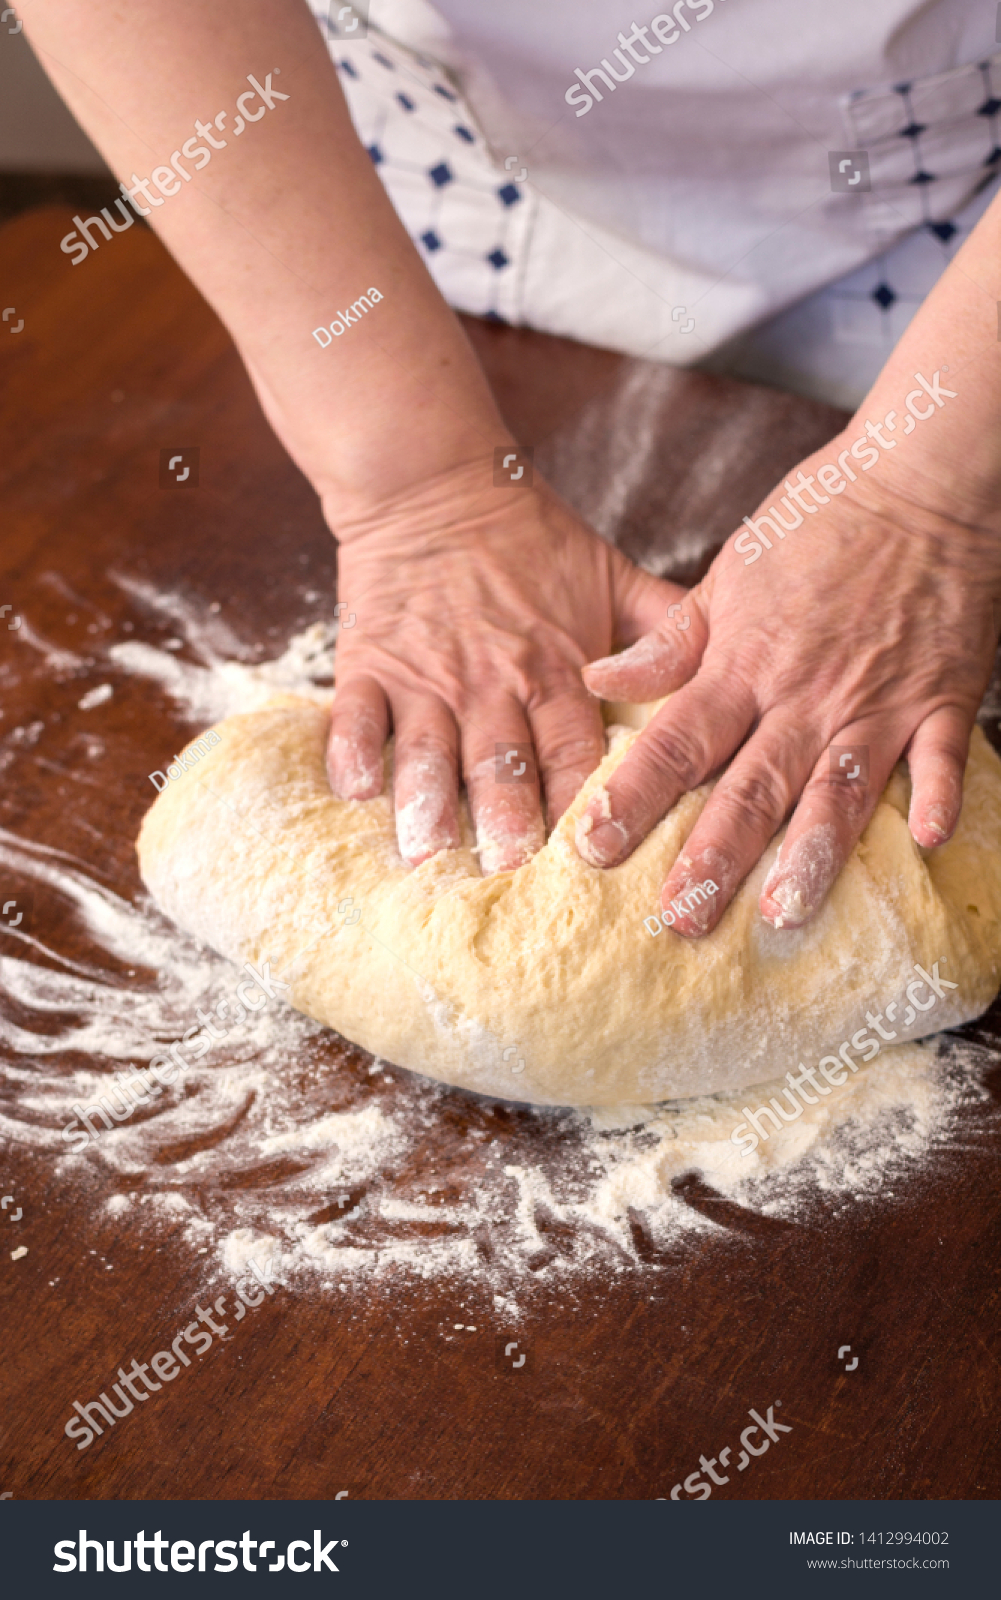 Woman making yeast dough at home #1412994002